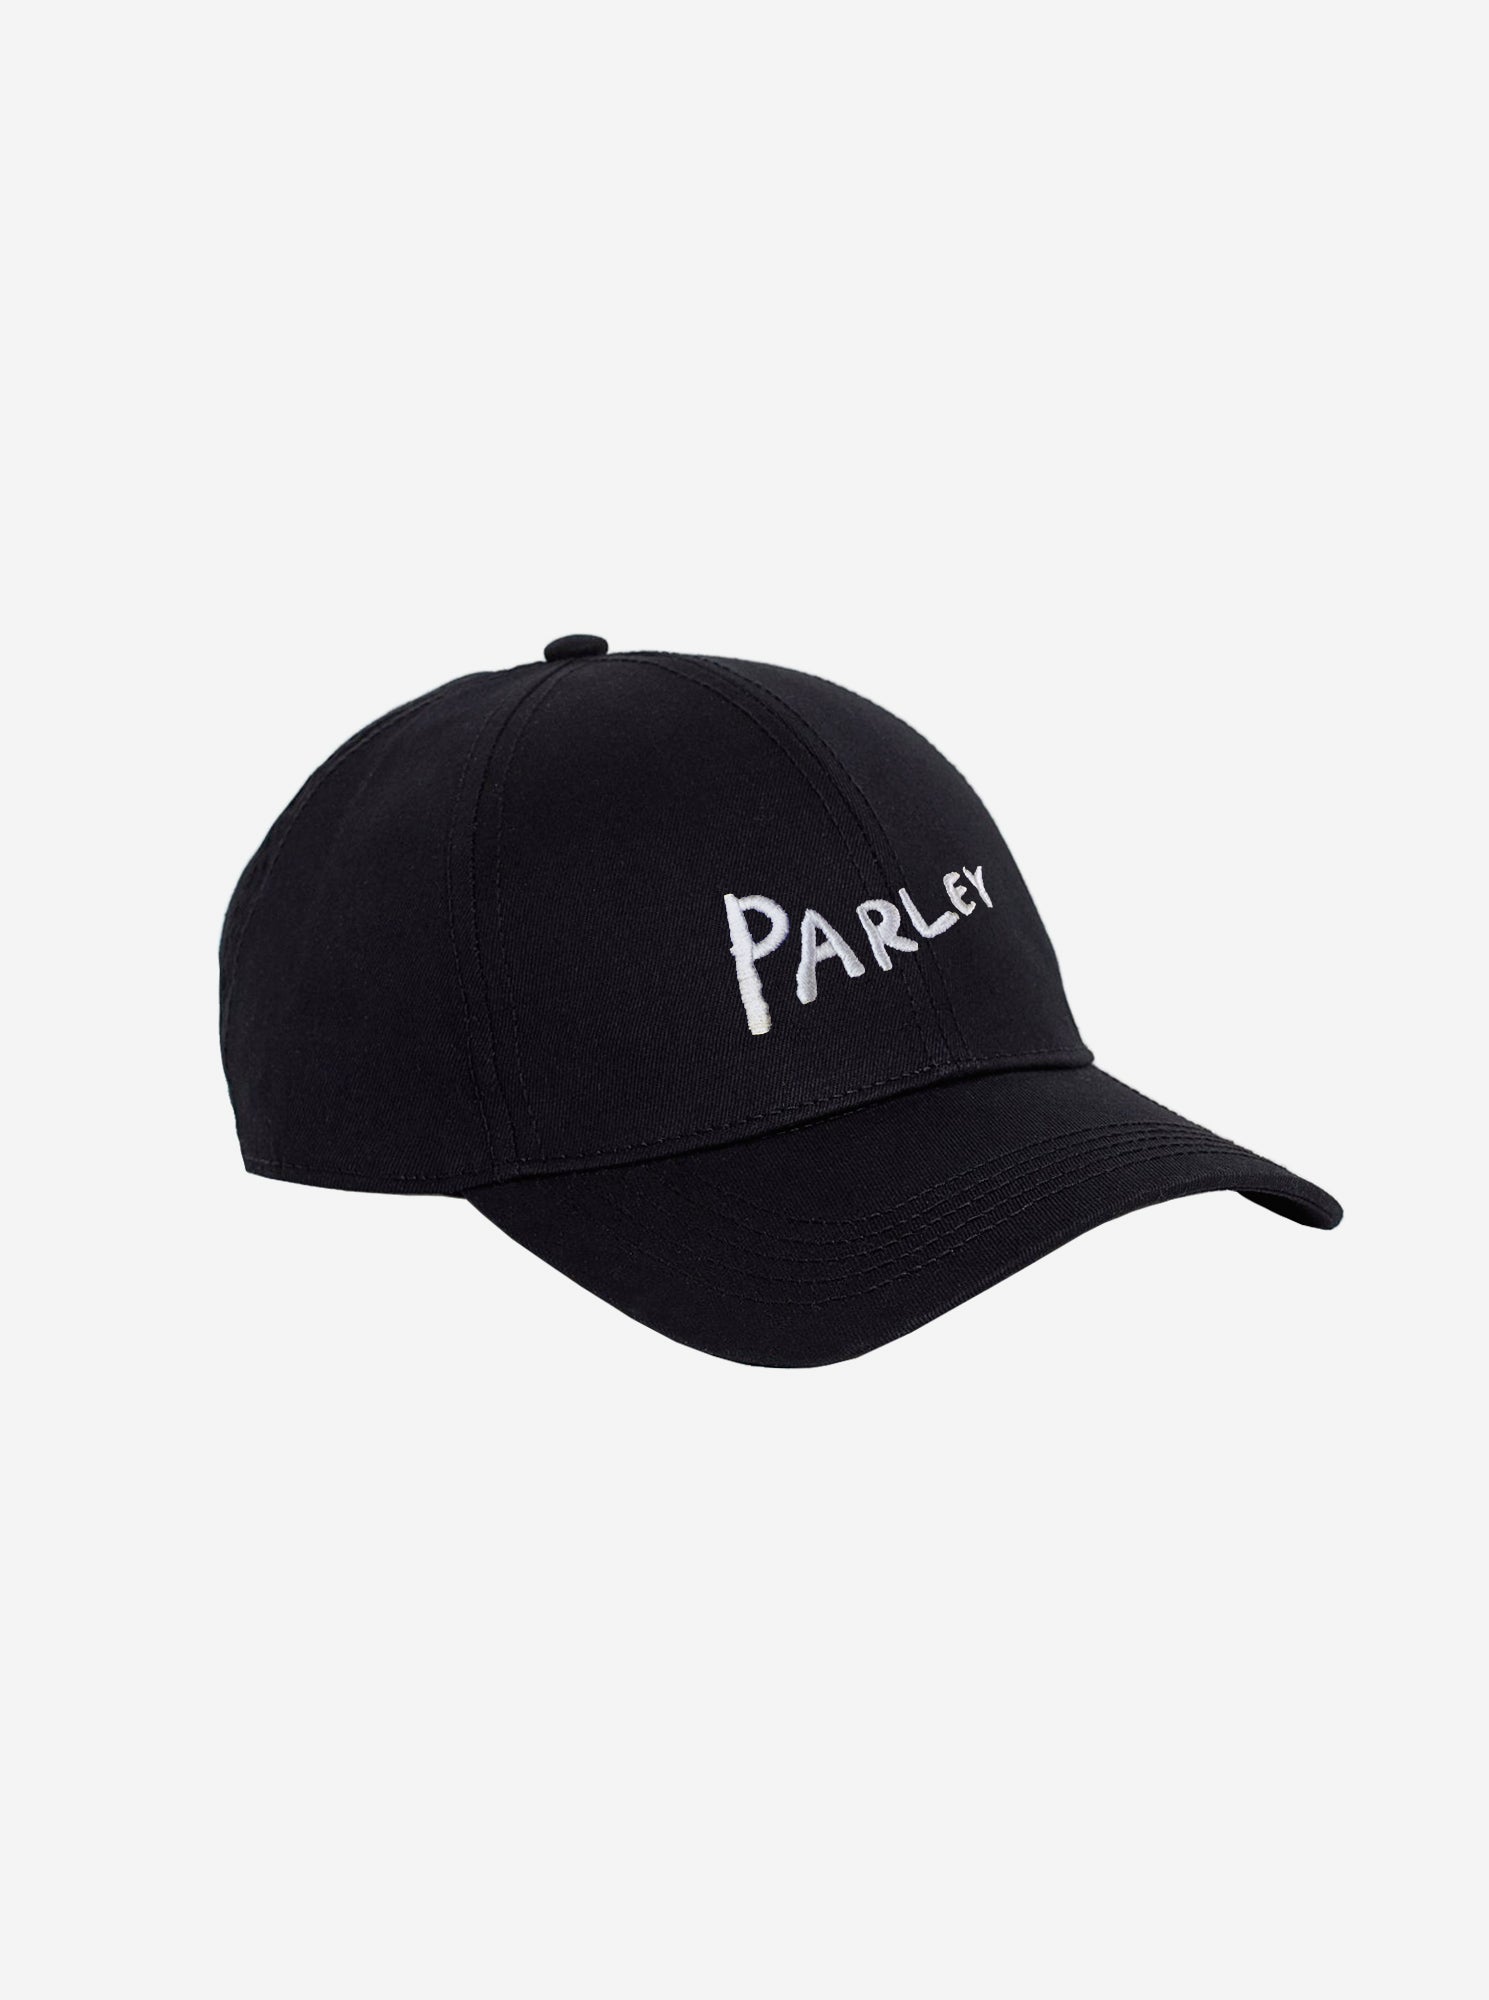 Embroidered Parley Cap